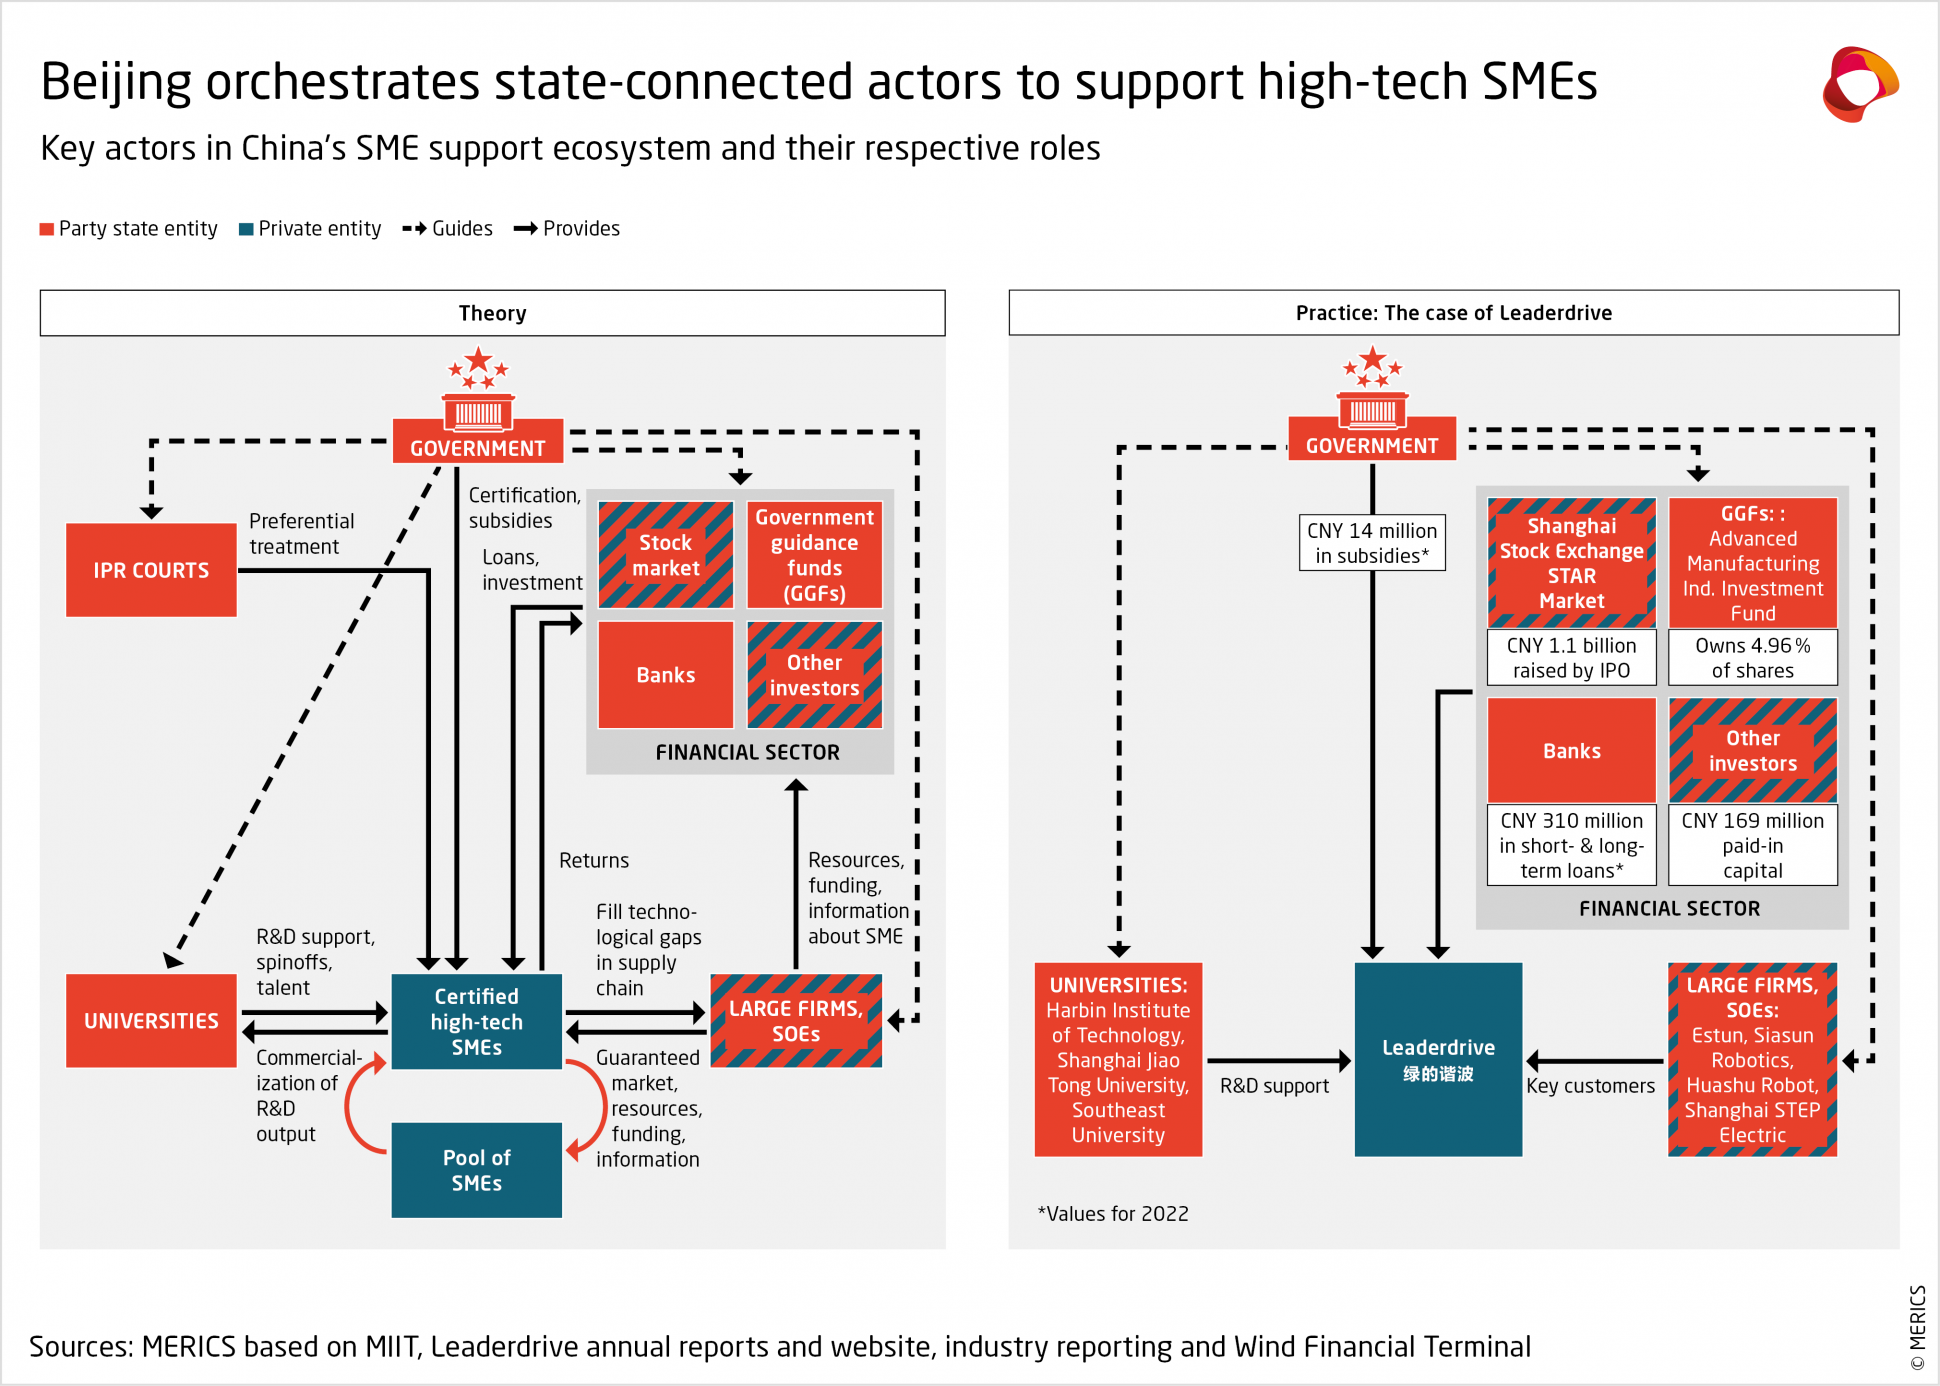 merics-report-accelerator-state-key-actors-in-chinas-sme-support-ecosystem.png